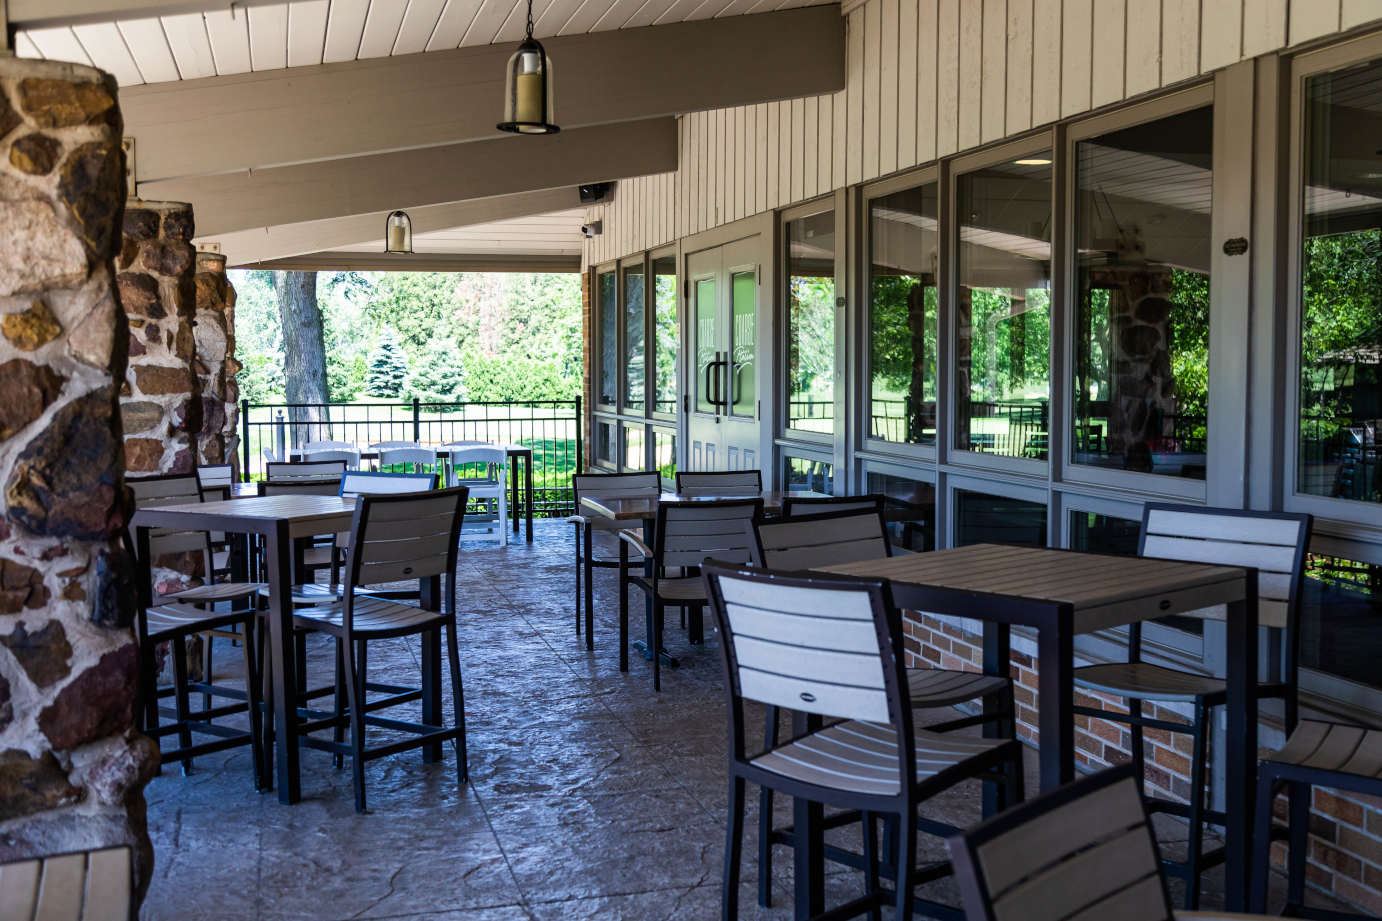 Covered patio area, tables and seats